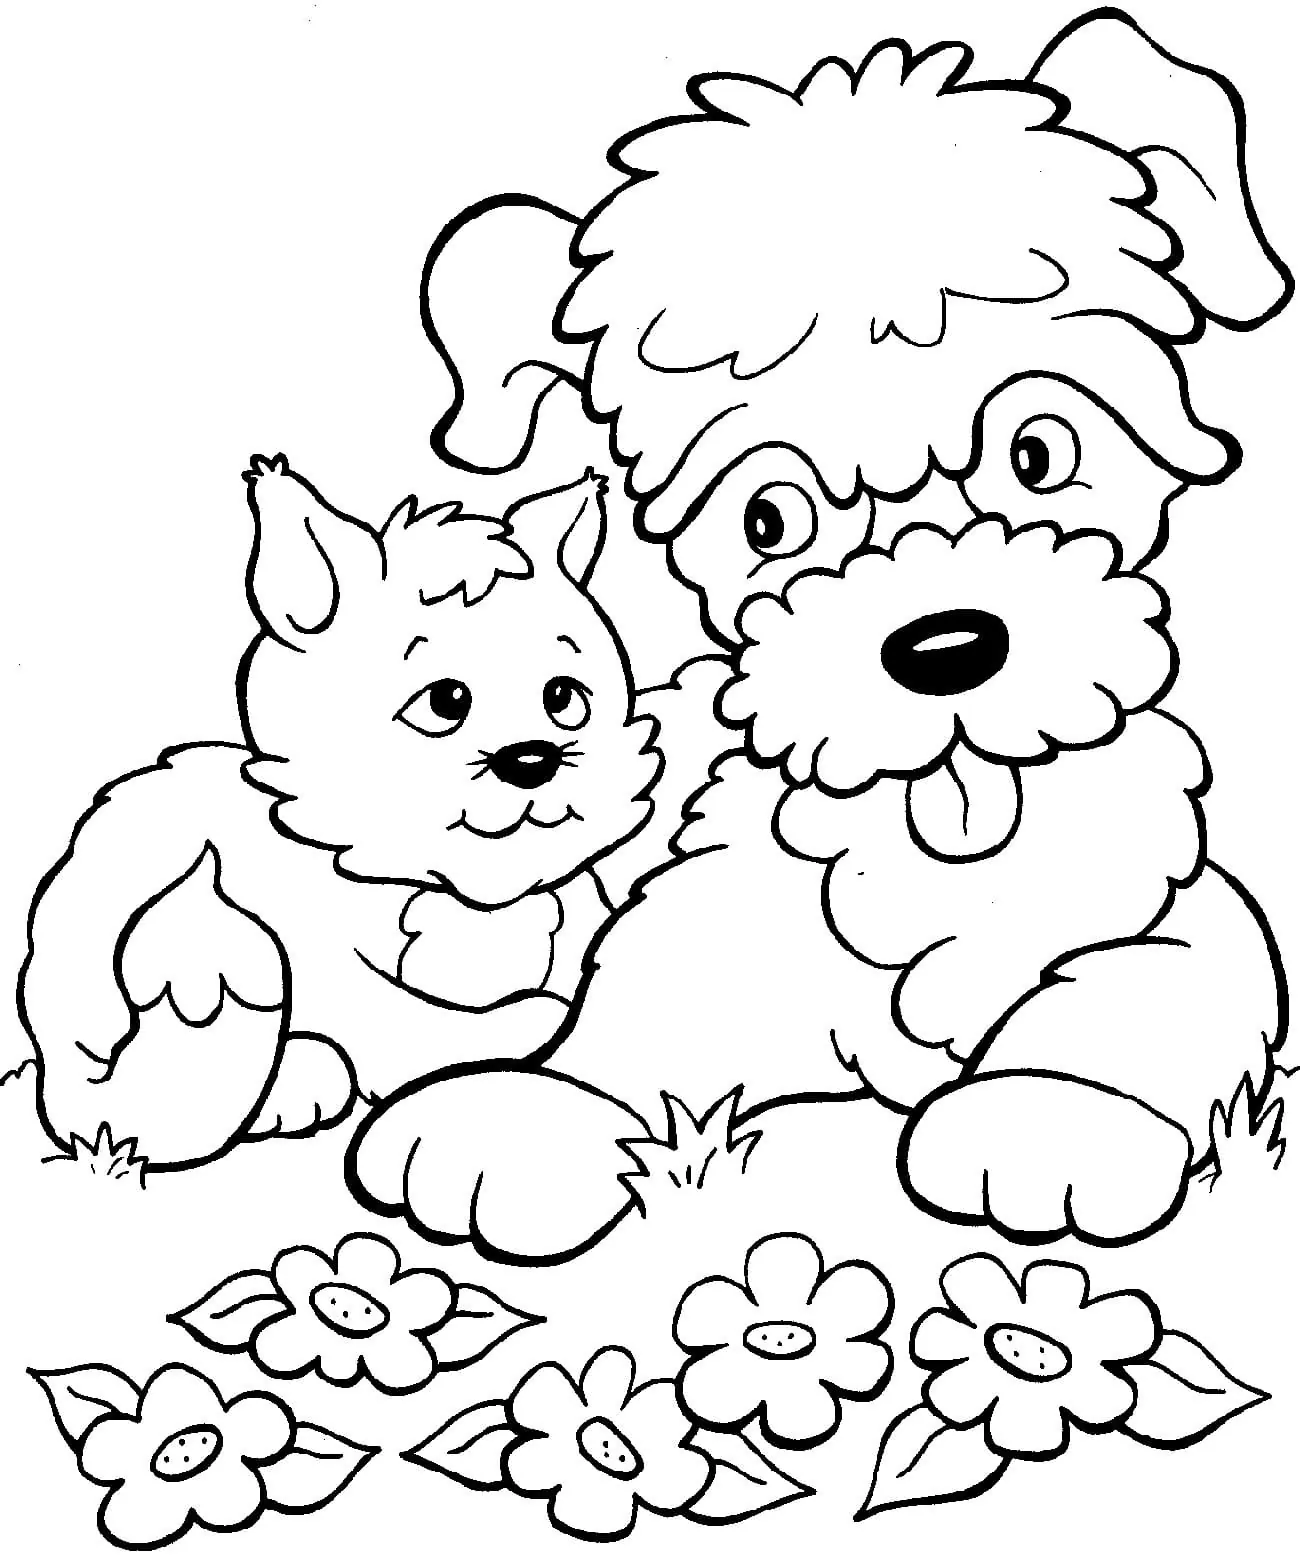 Friendly Dog and Cat Coloring Page - Free Printable Coloring Pages for Kids